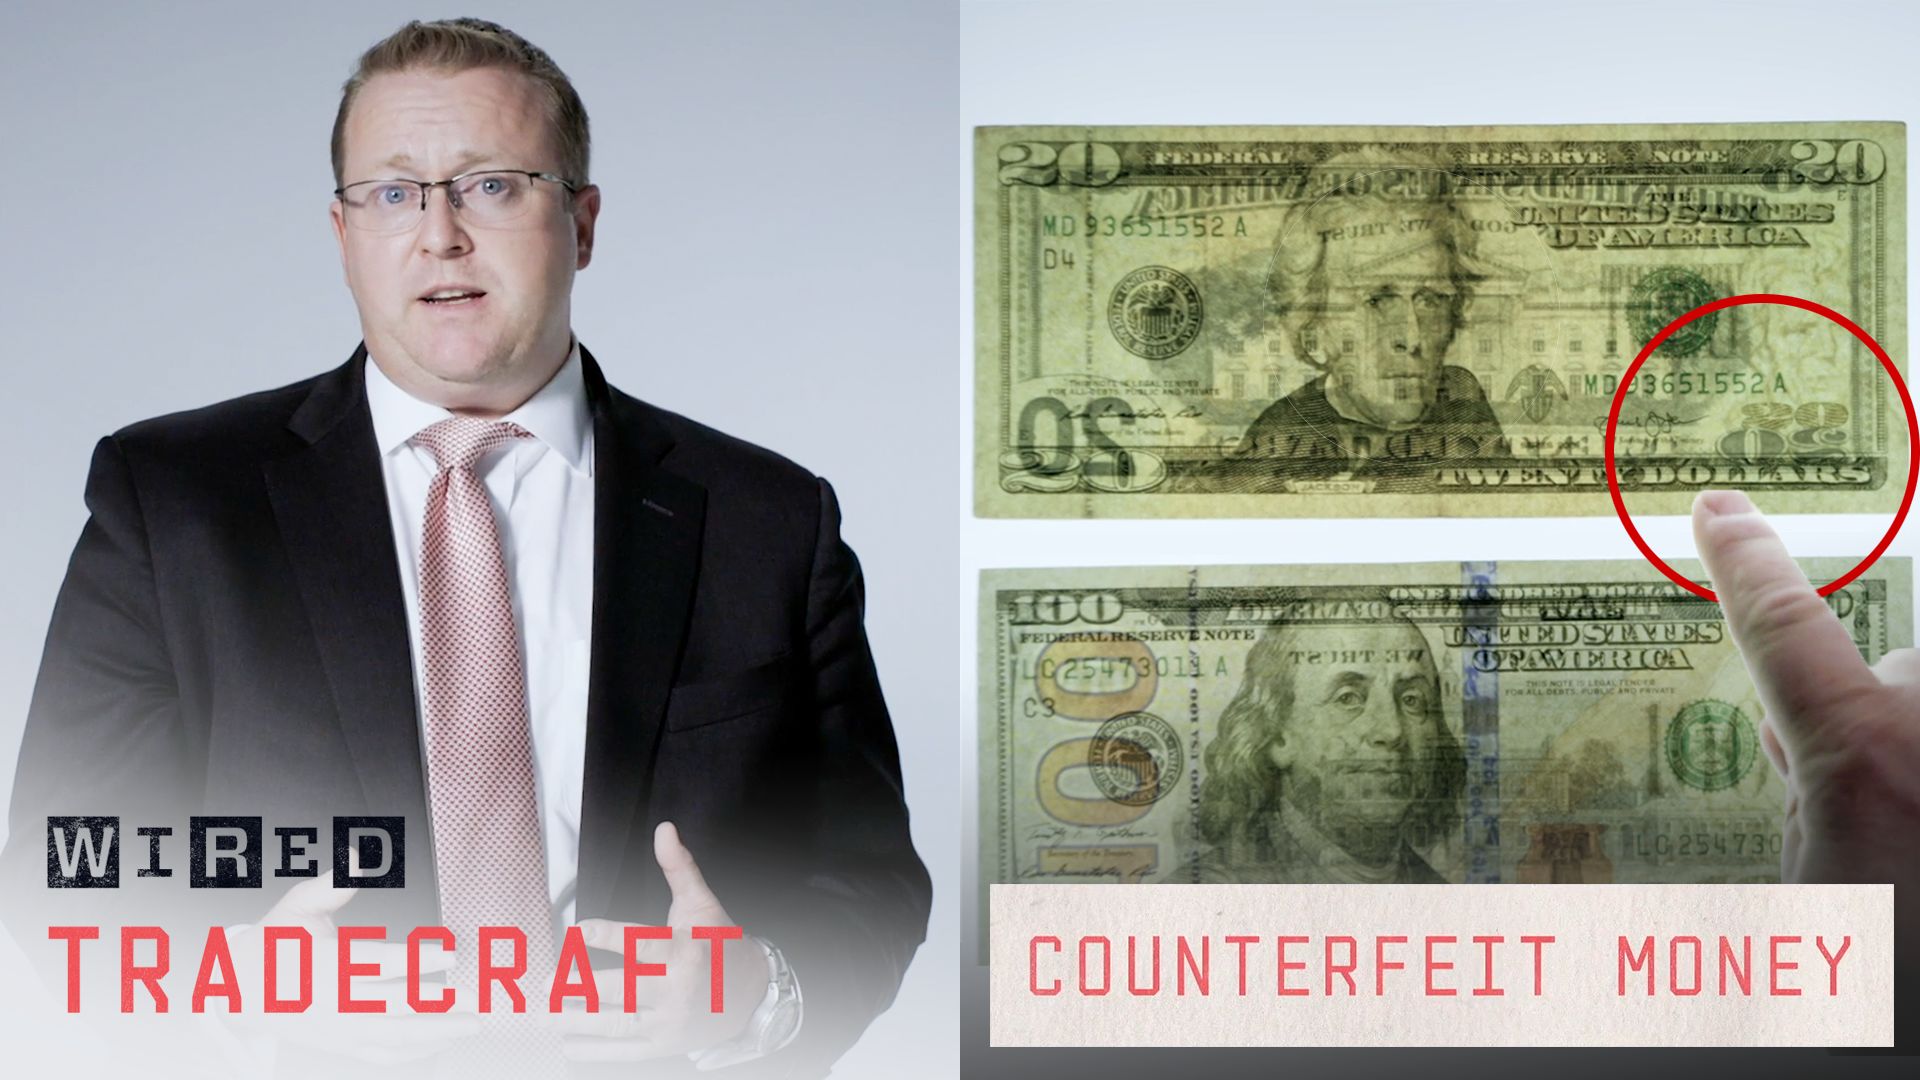 how do store and bank employees detect counterfeit bills just by looking at them